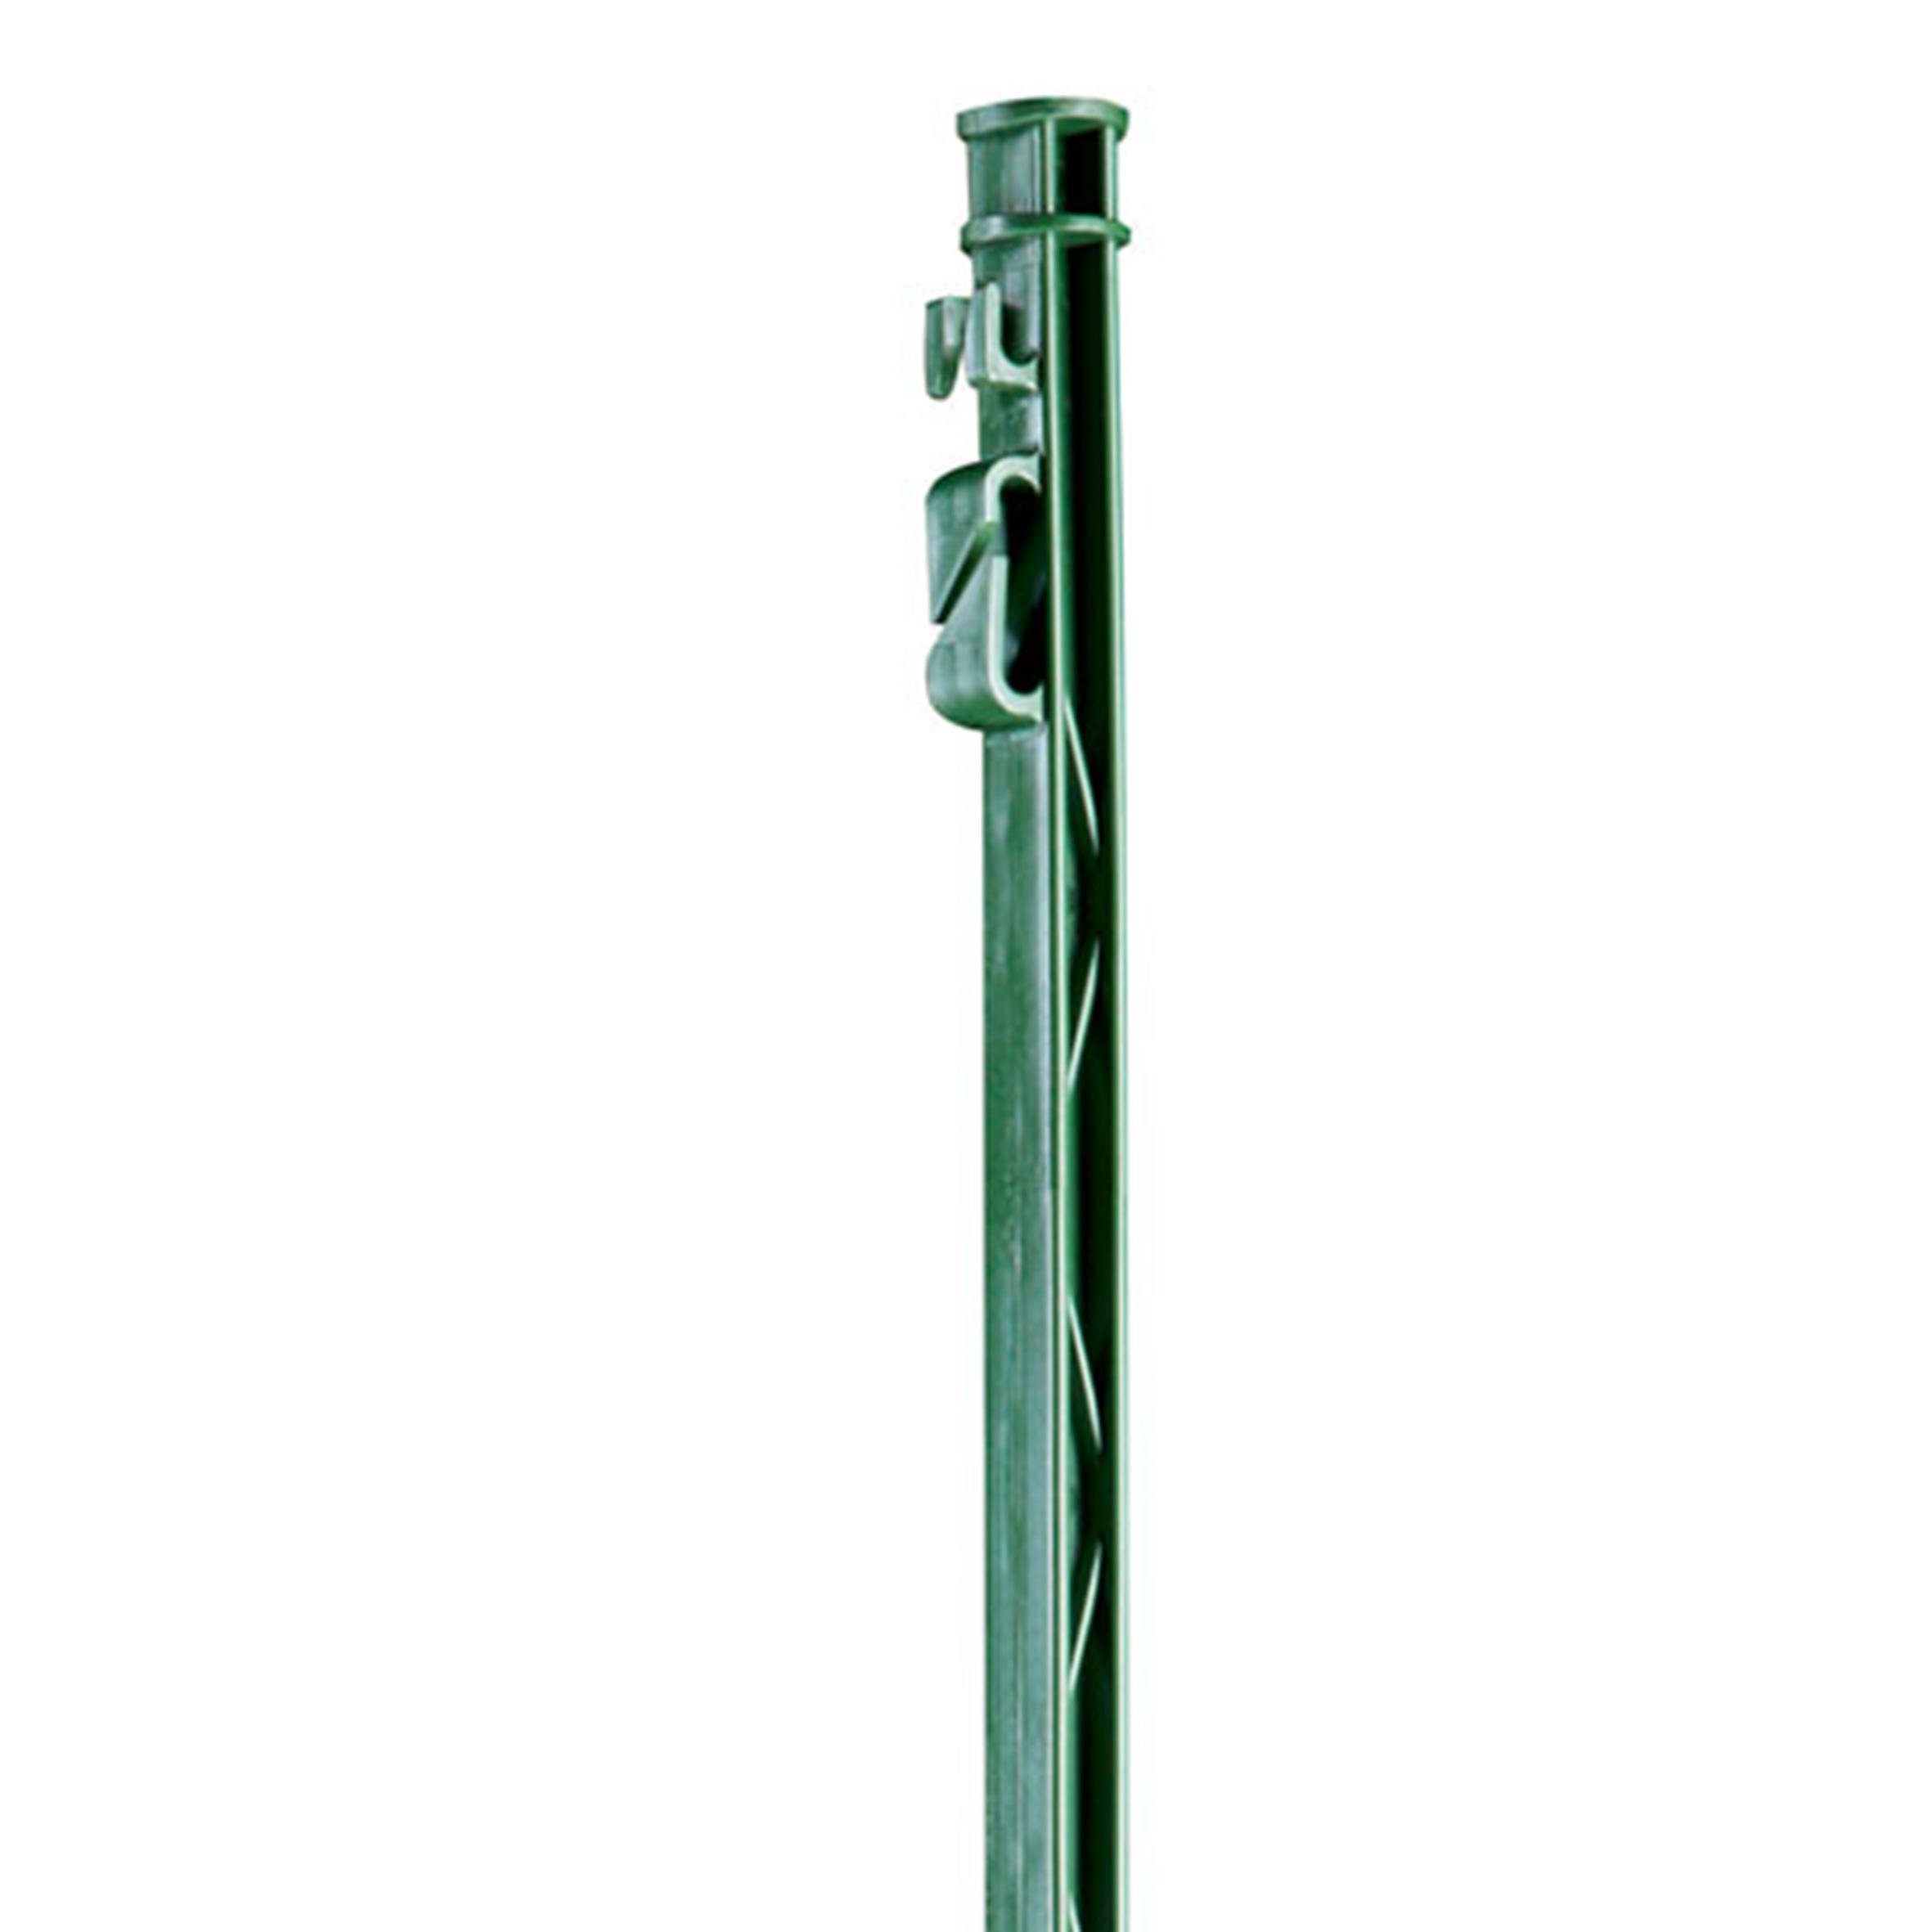 Plastic Horse Riding Fencing Posts 160 cm 5-Pack - Green Stirrup 4/5